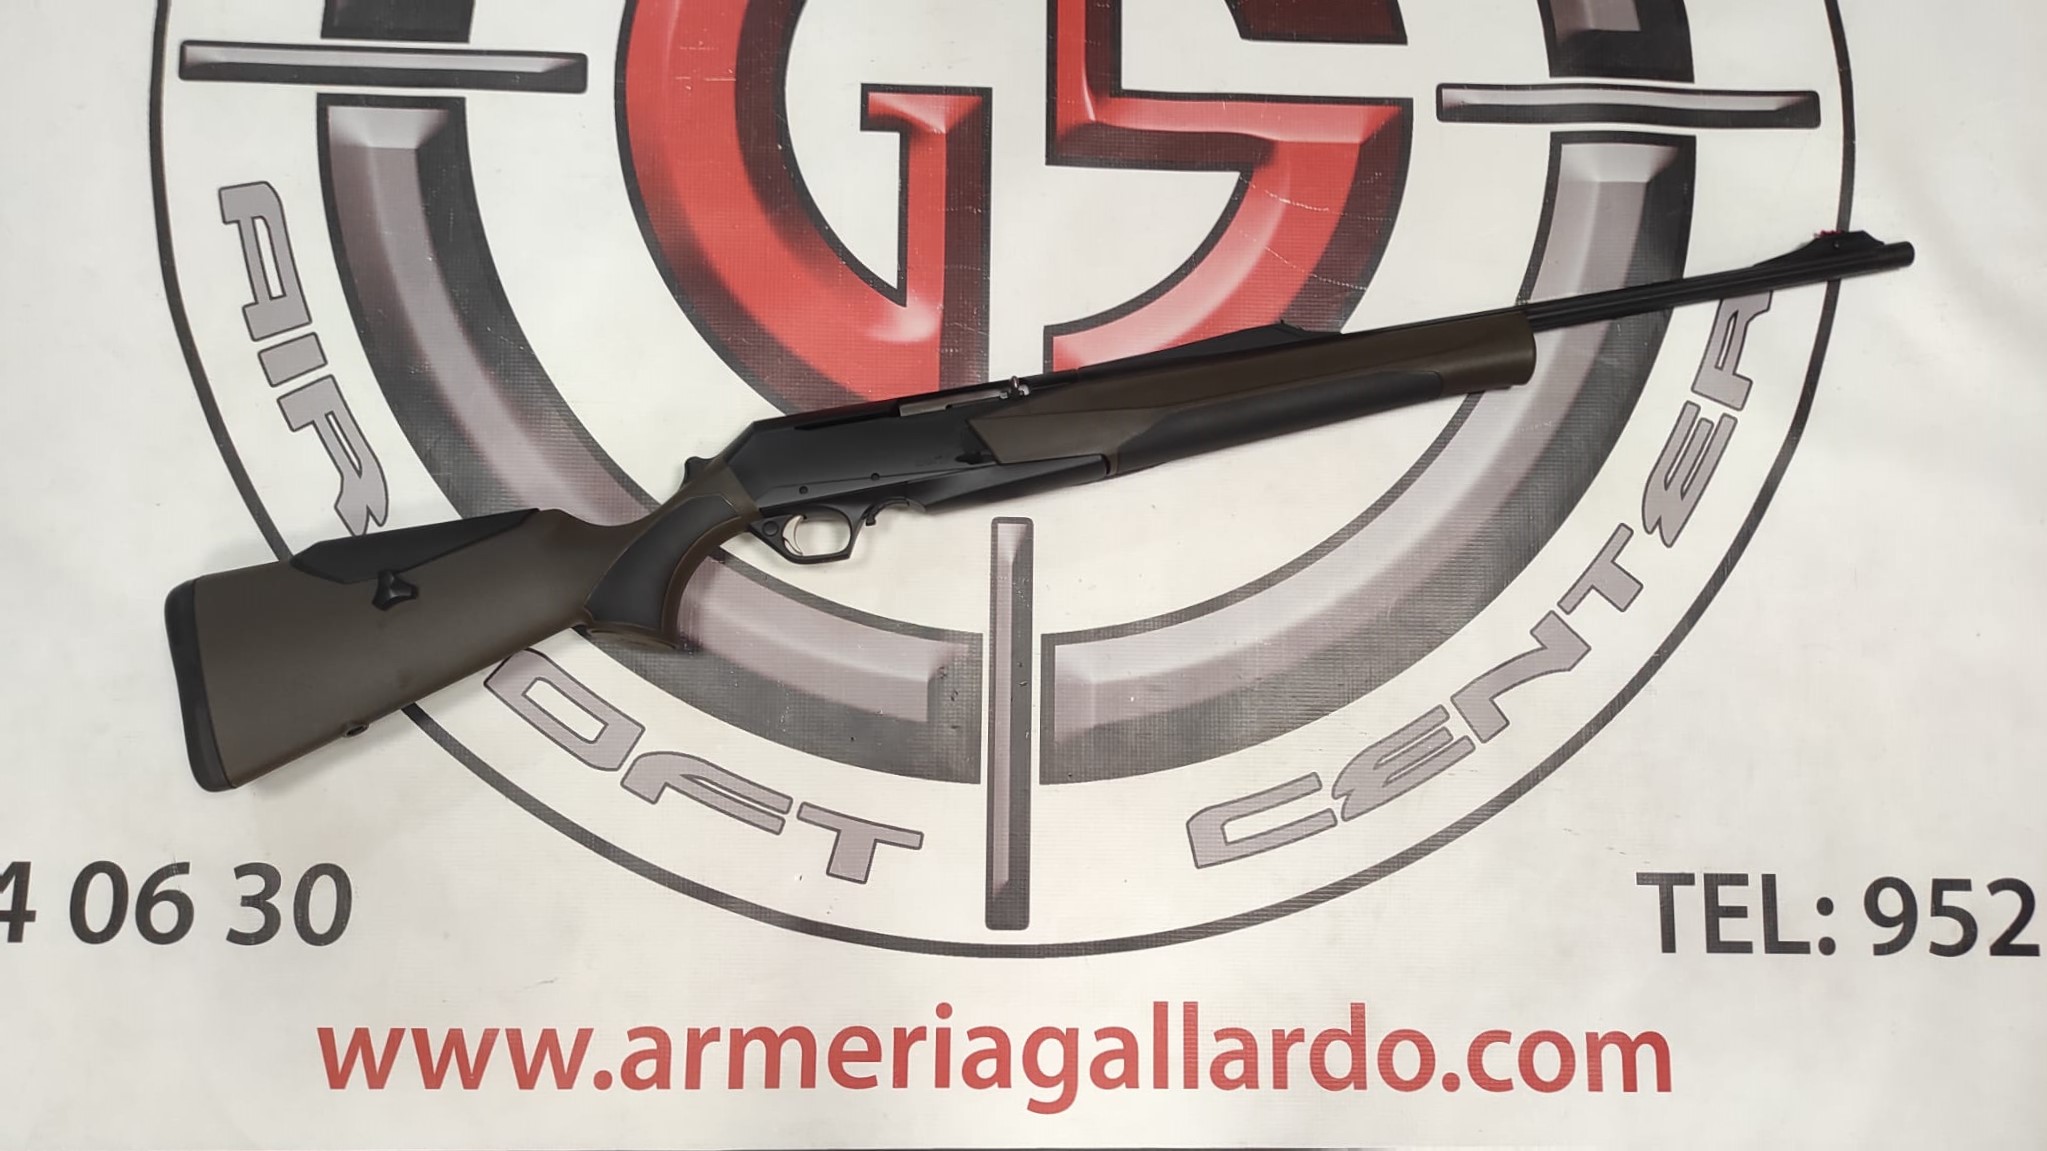 RIFLE BROWNING MK3 COMPOSITE BROWN AJUSTABLE